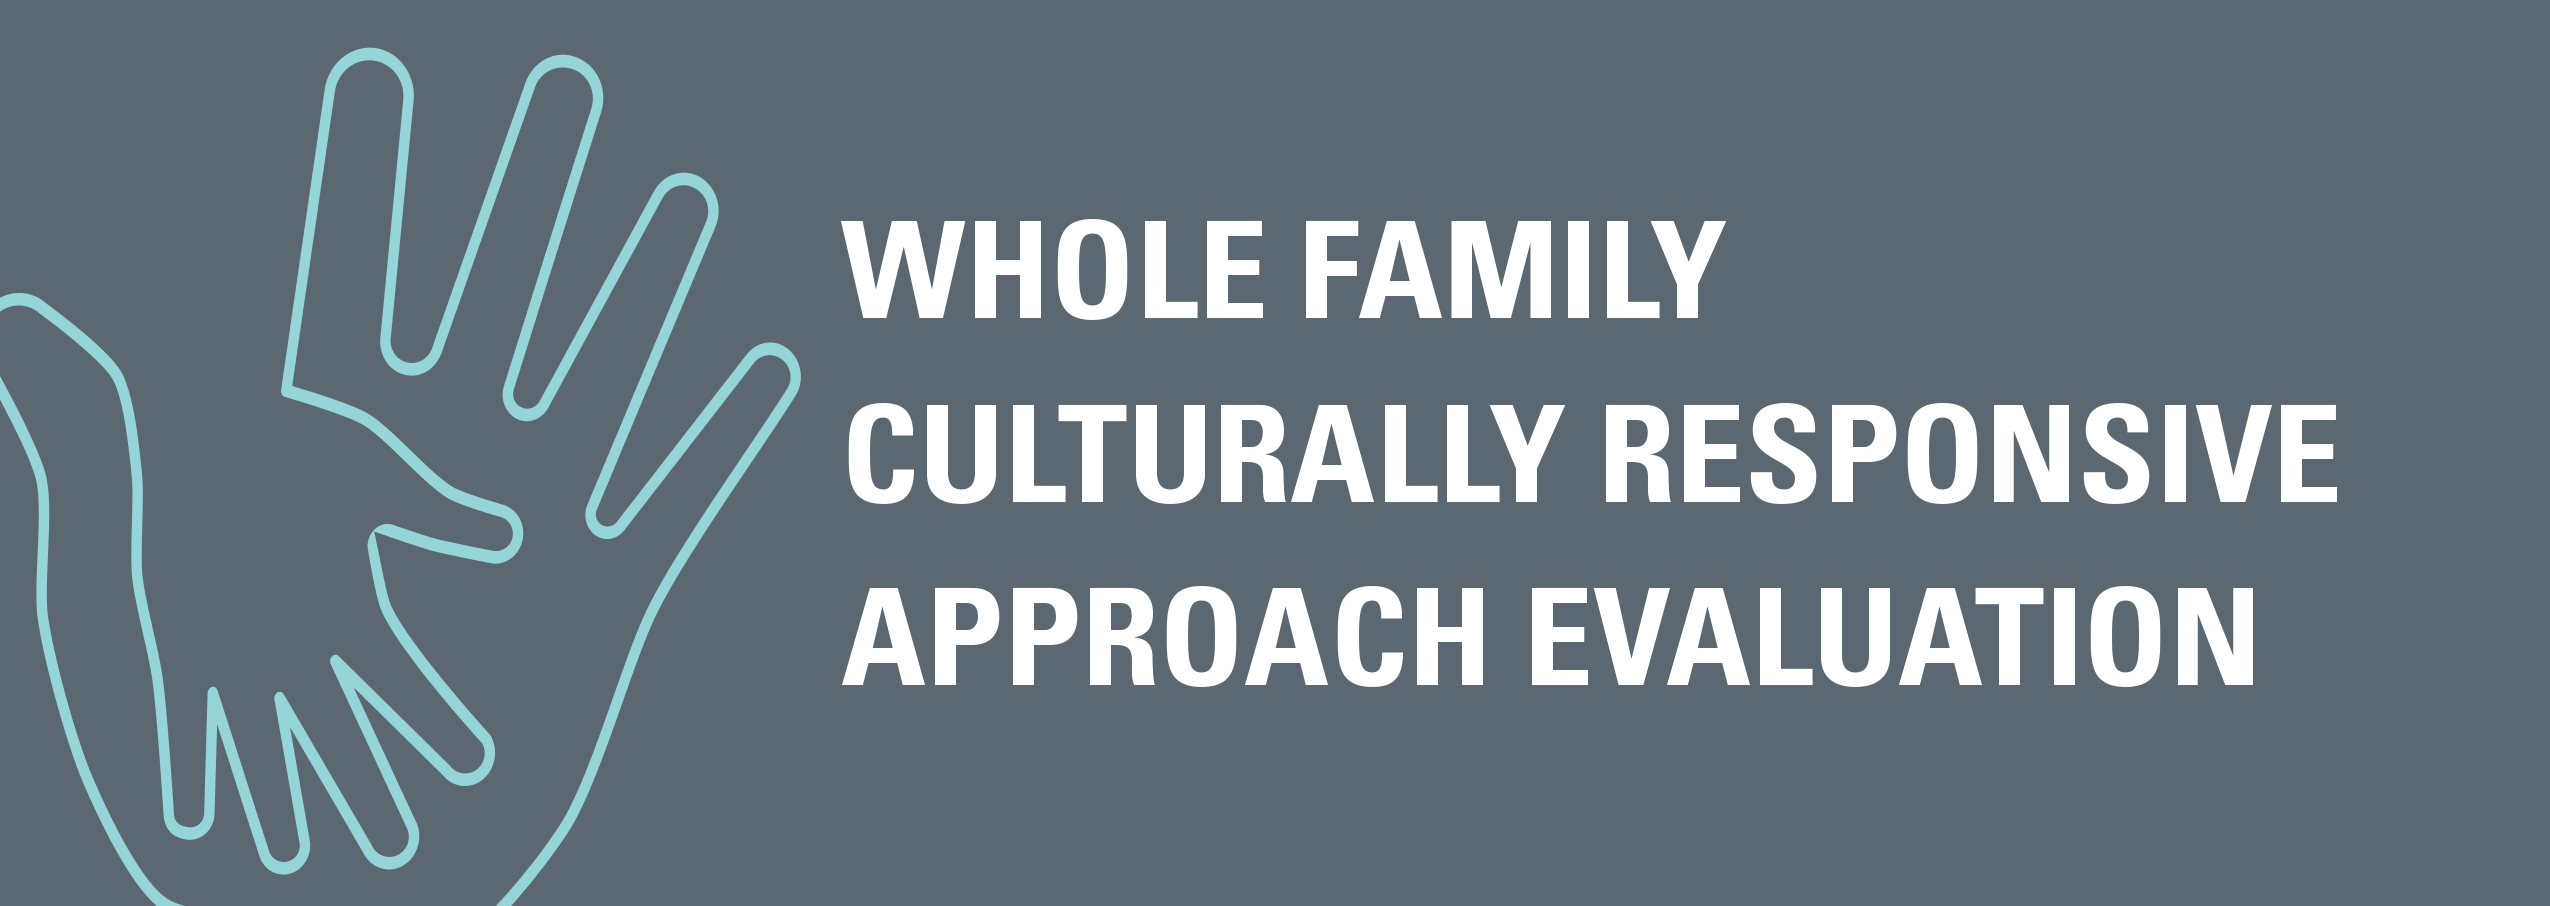 Whole Family Culturally Responsive Approach Evaluation